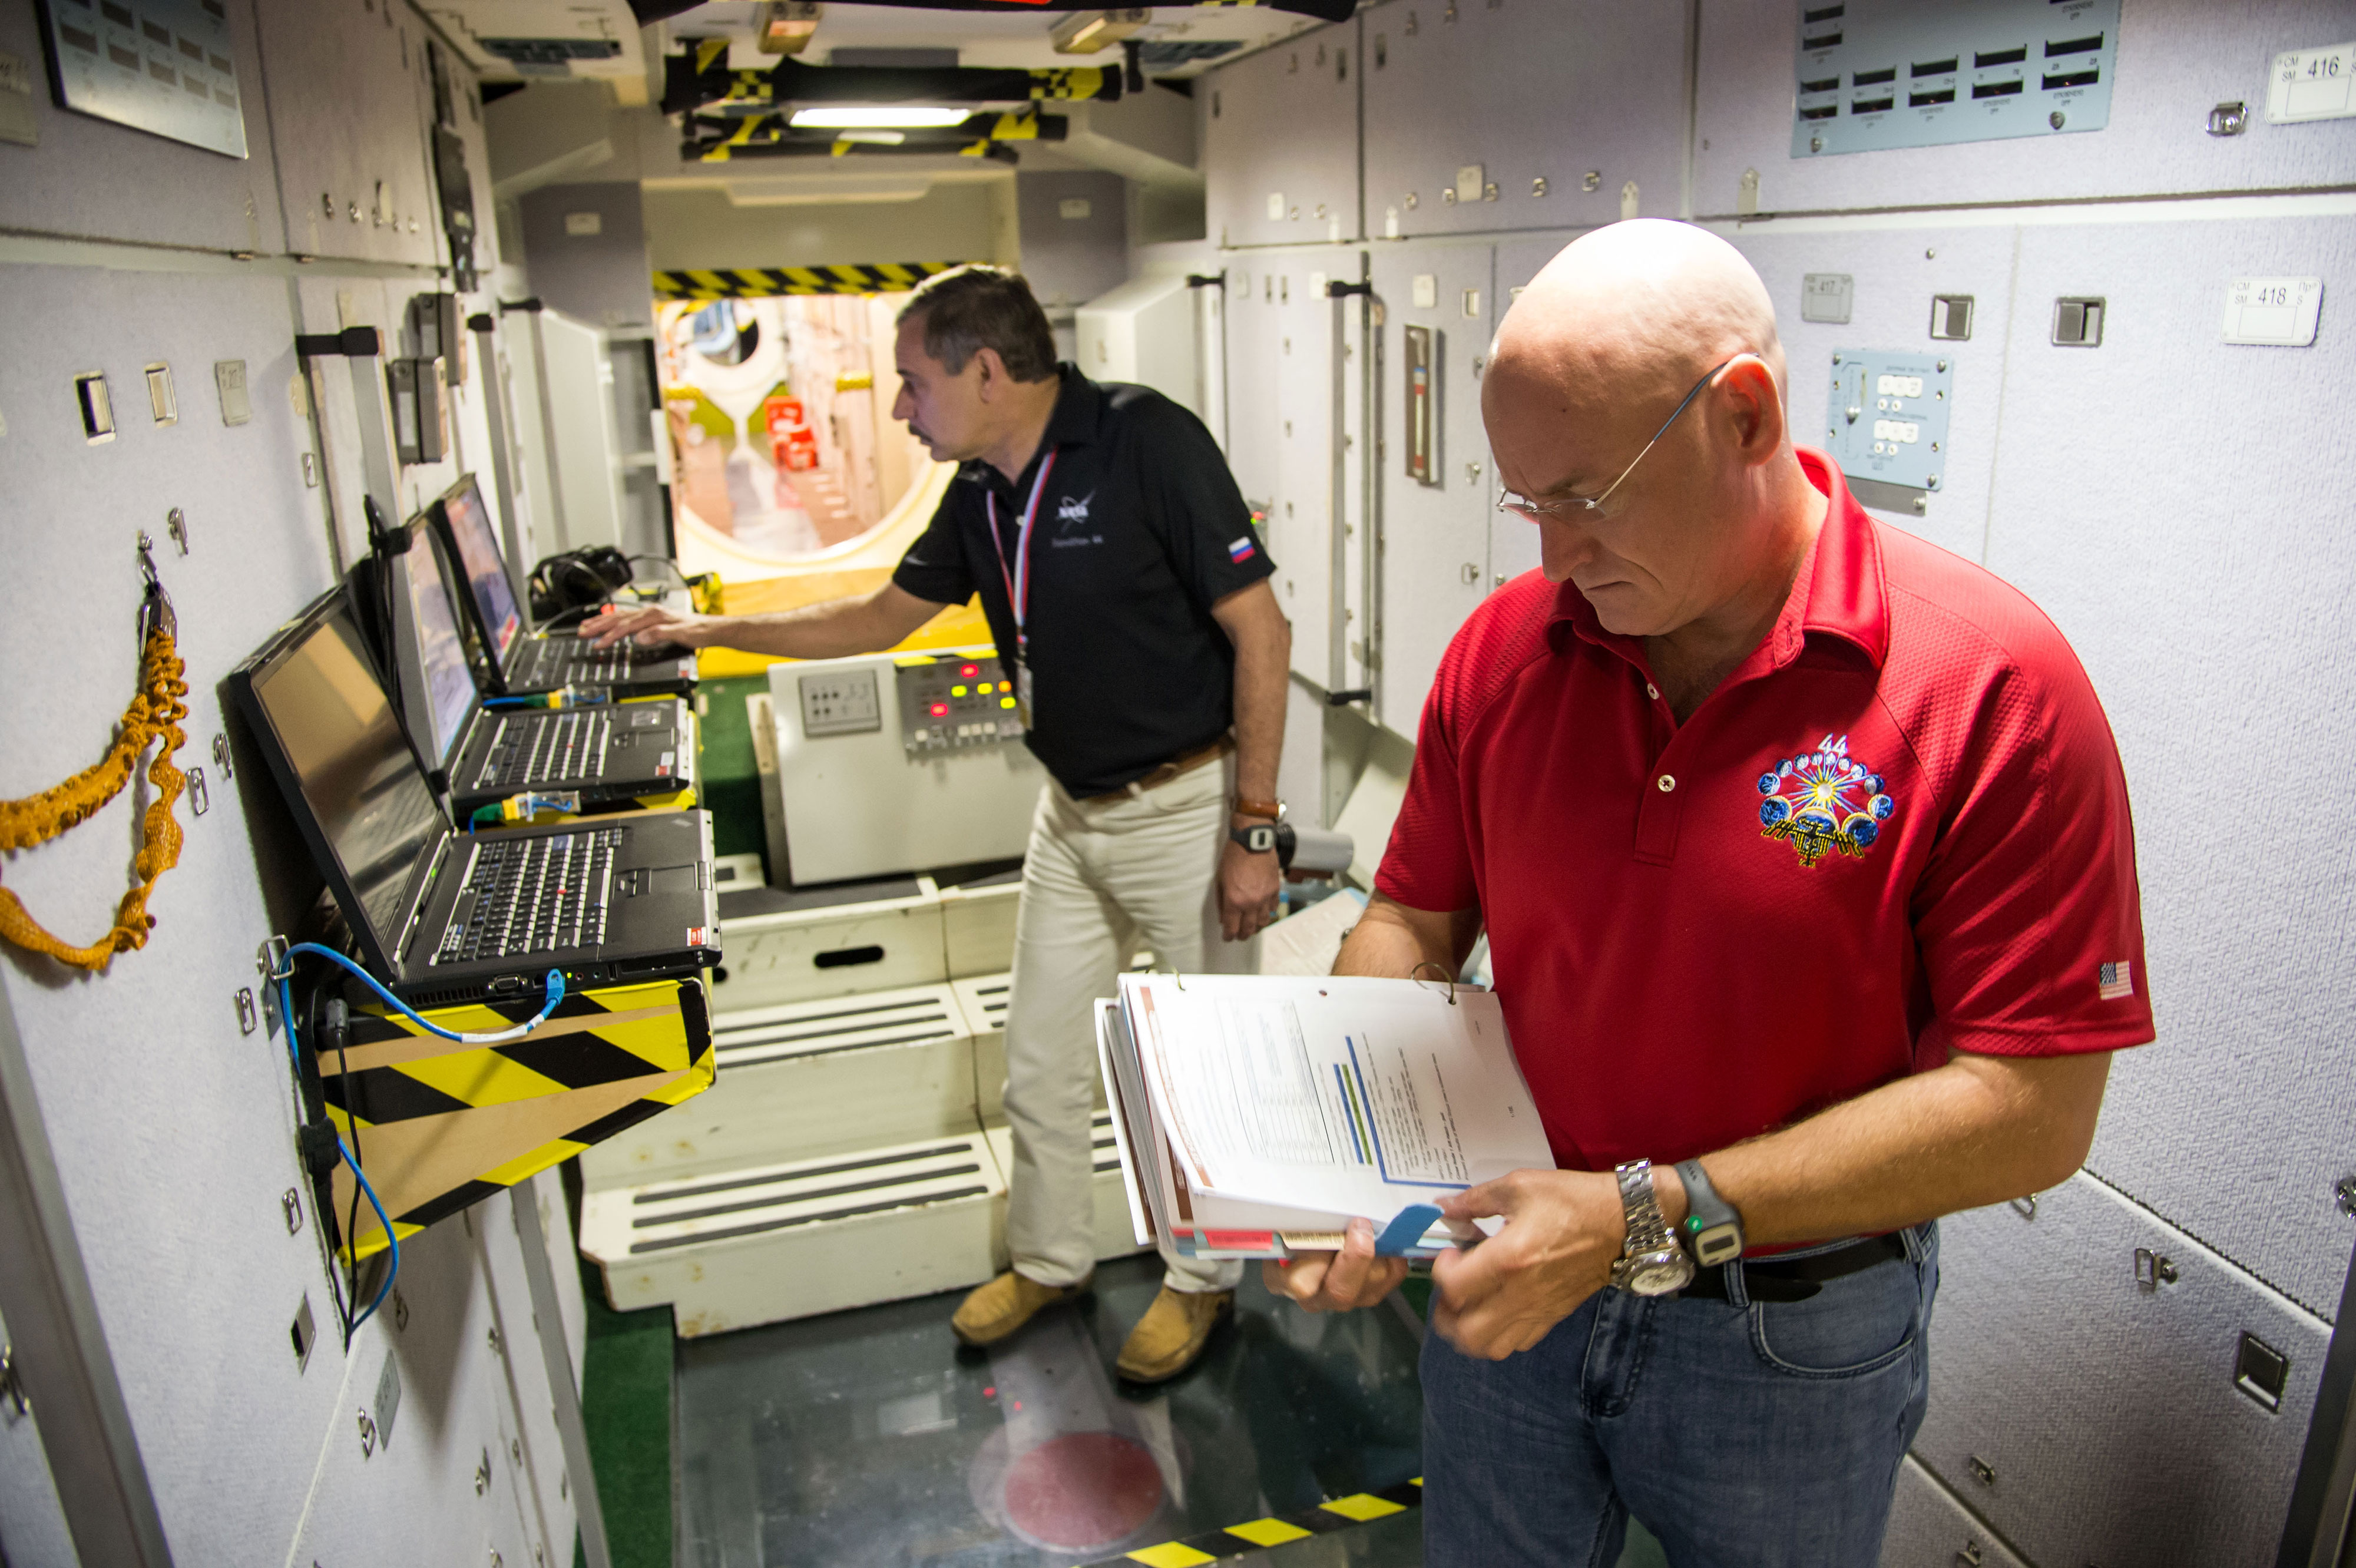 NASA astronaut Scott Kelly (foreground) and Russian cosmonaut Mikhail Kornienko participate in an emergency scenario training session in an International Space Station mock-up/trainer at NASA’s Johnson Space Center in Houston, Texas. Credit: NASA/James Blair